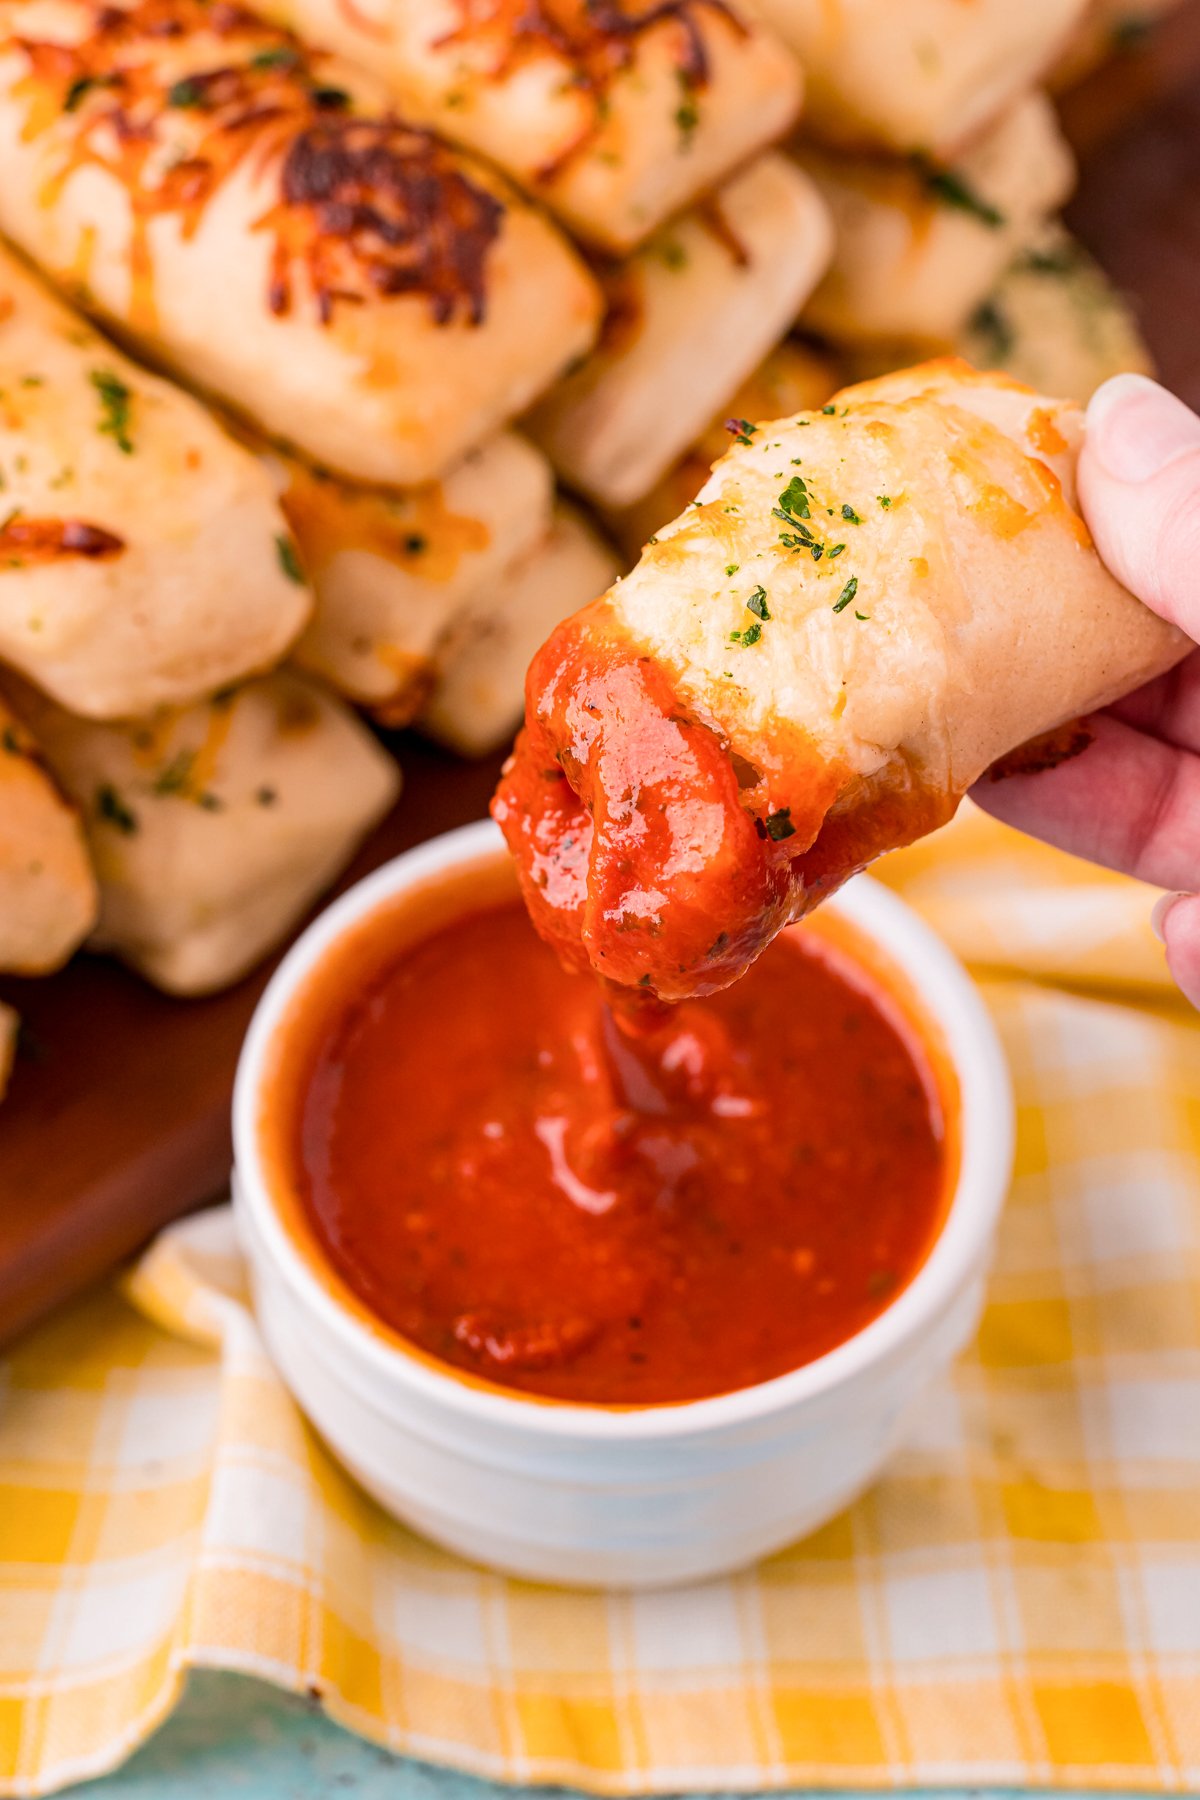 Breadstick being dipping into sauce